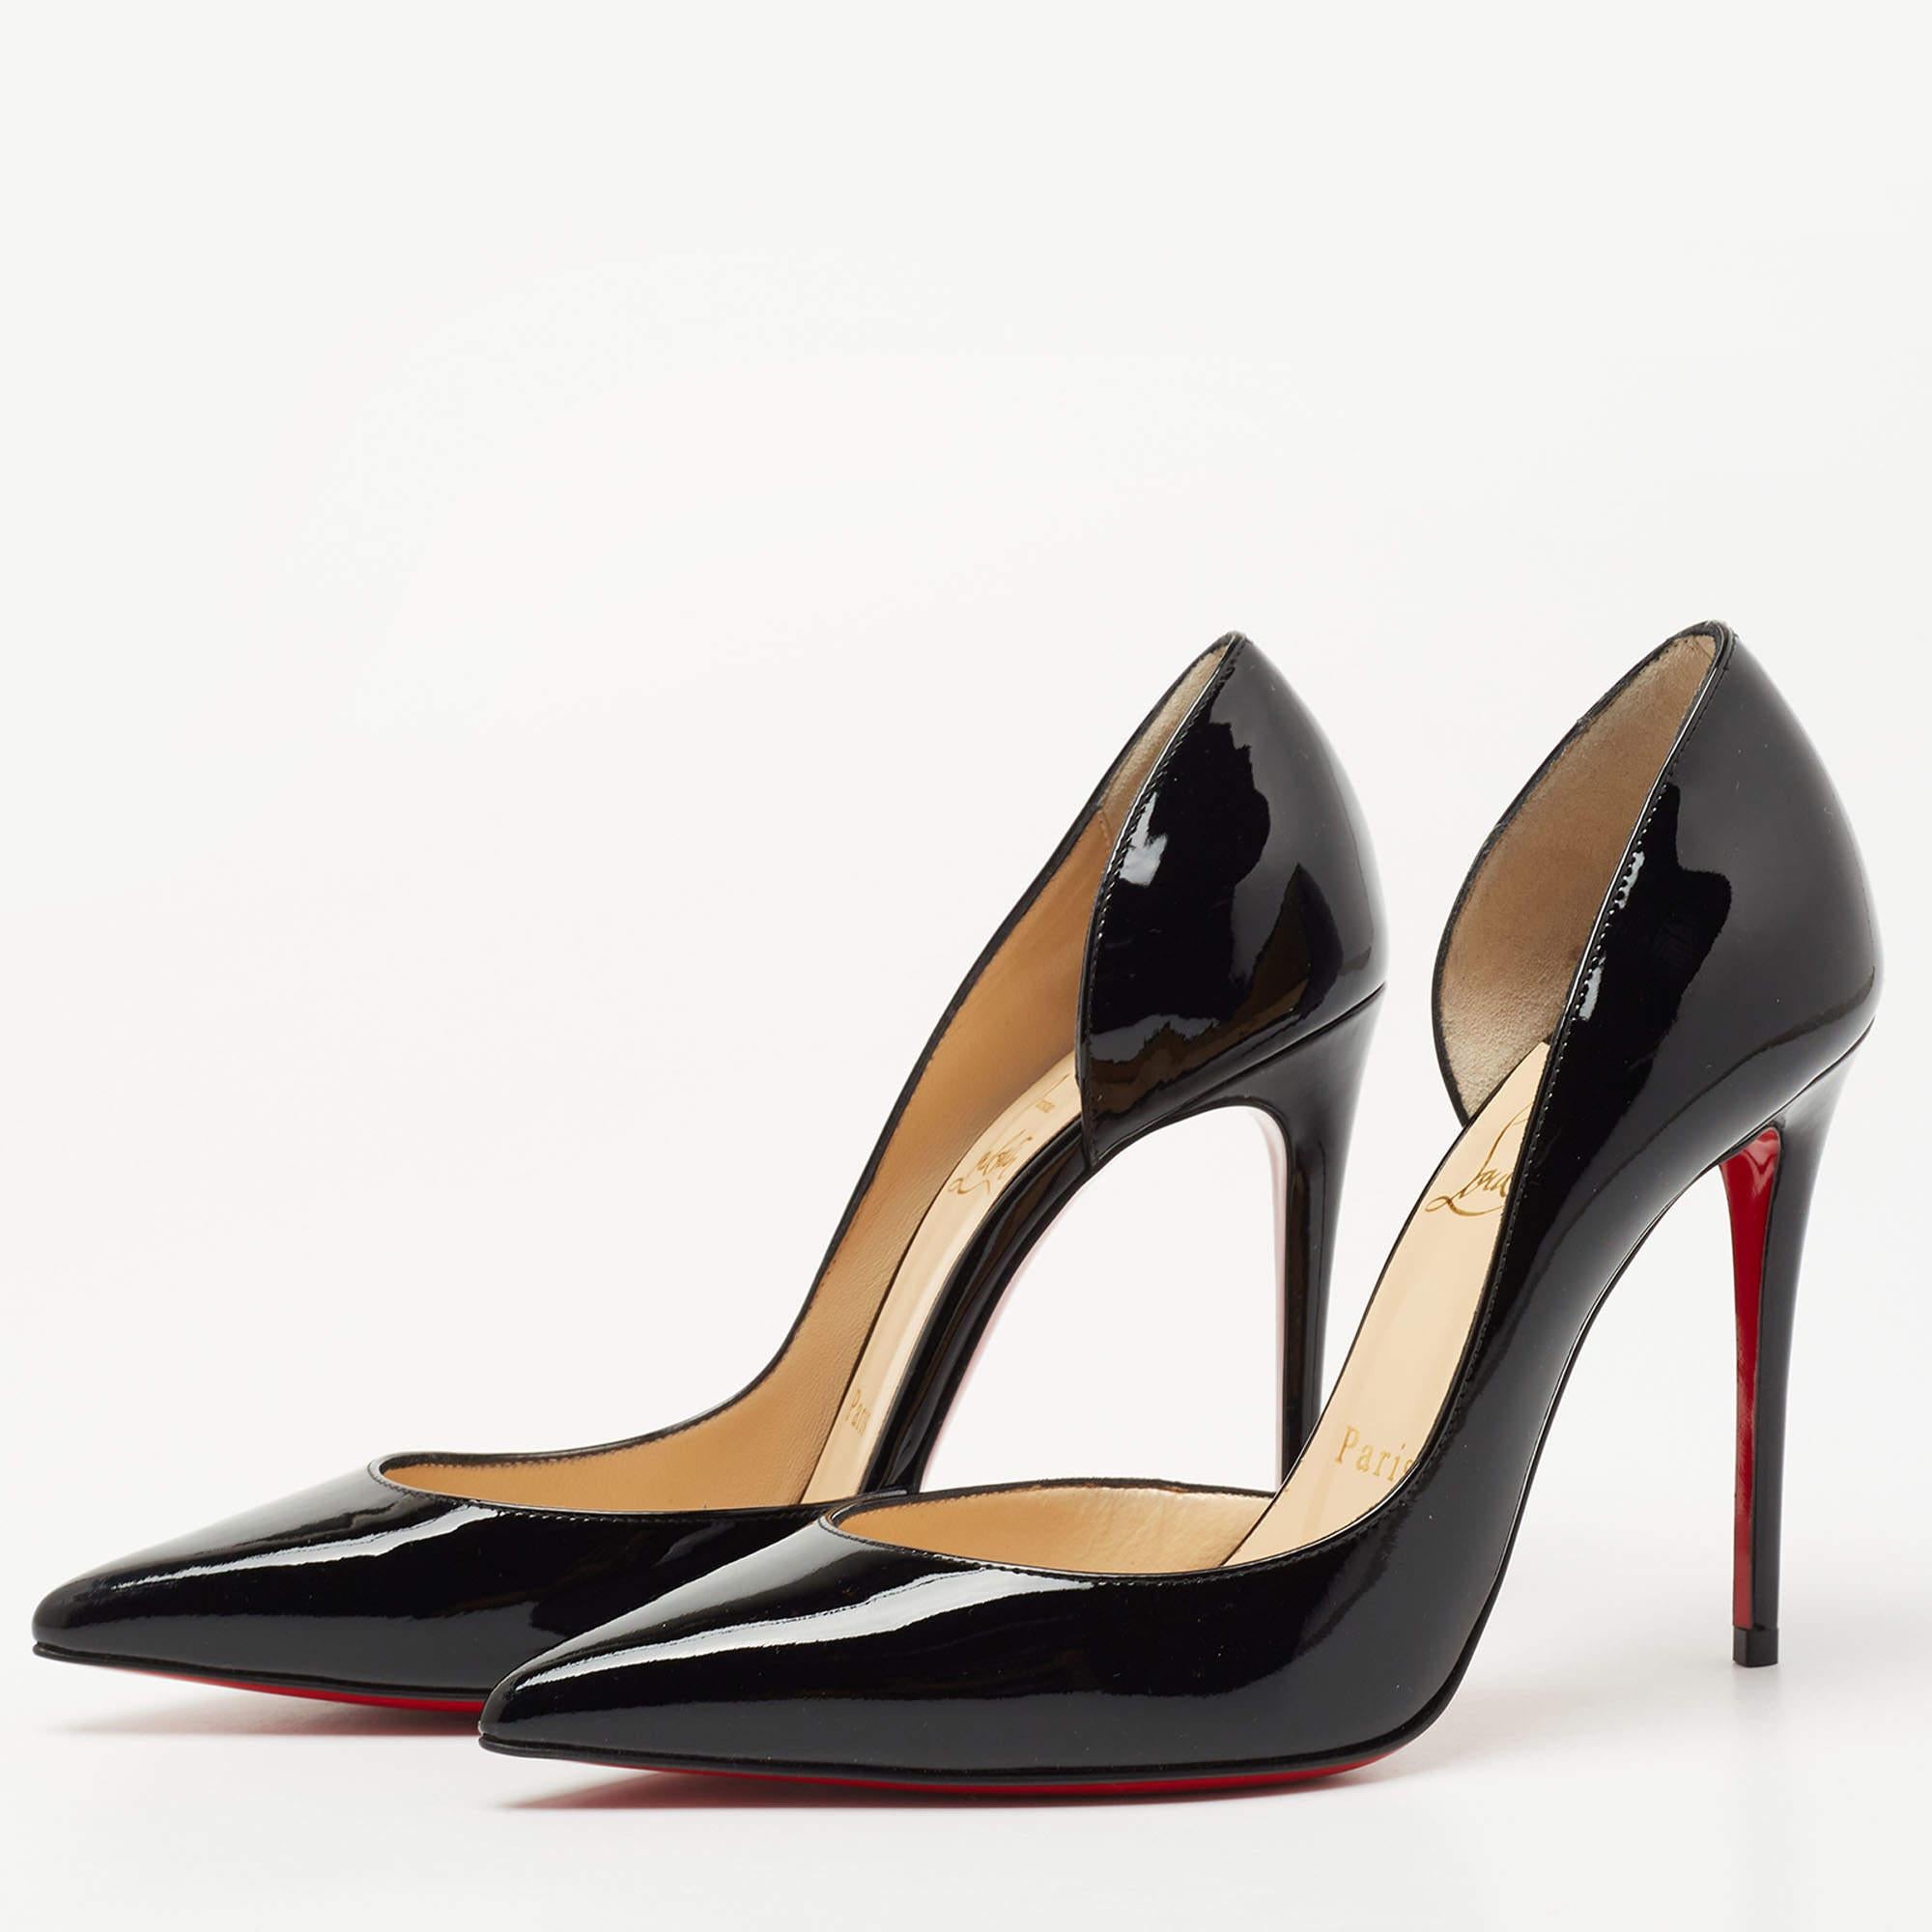 The perfectly placed d'Orsay cut of this pair of Christian Louboutin pumps exemplifies the brand's mastery in shoemaking. Created from patent leather, it embodies a sharp silhouette. The signature red-lacquered sole of these shoes marks the rich